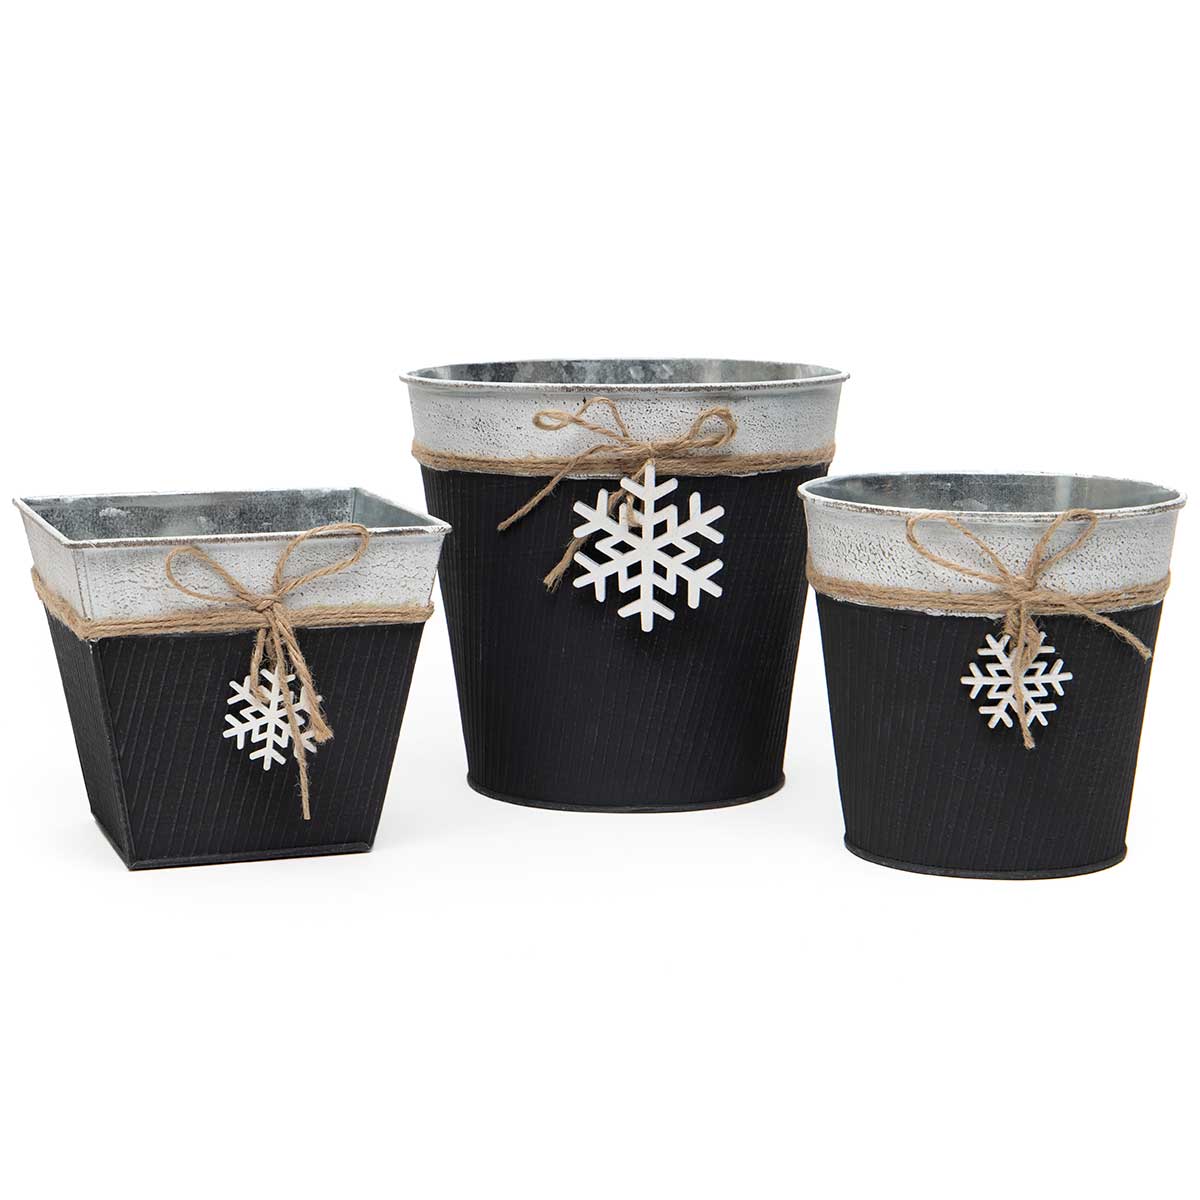 BUCKET RIBBED WITH SNOWFLAKE SQ 6IN X 6IN X 5IN METAL - Click Image to Close